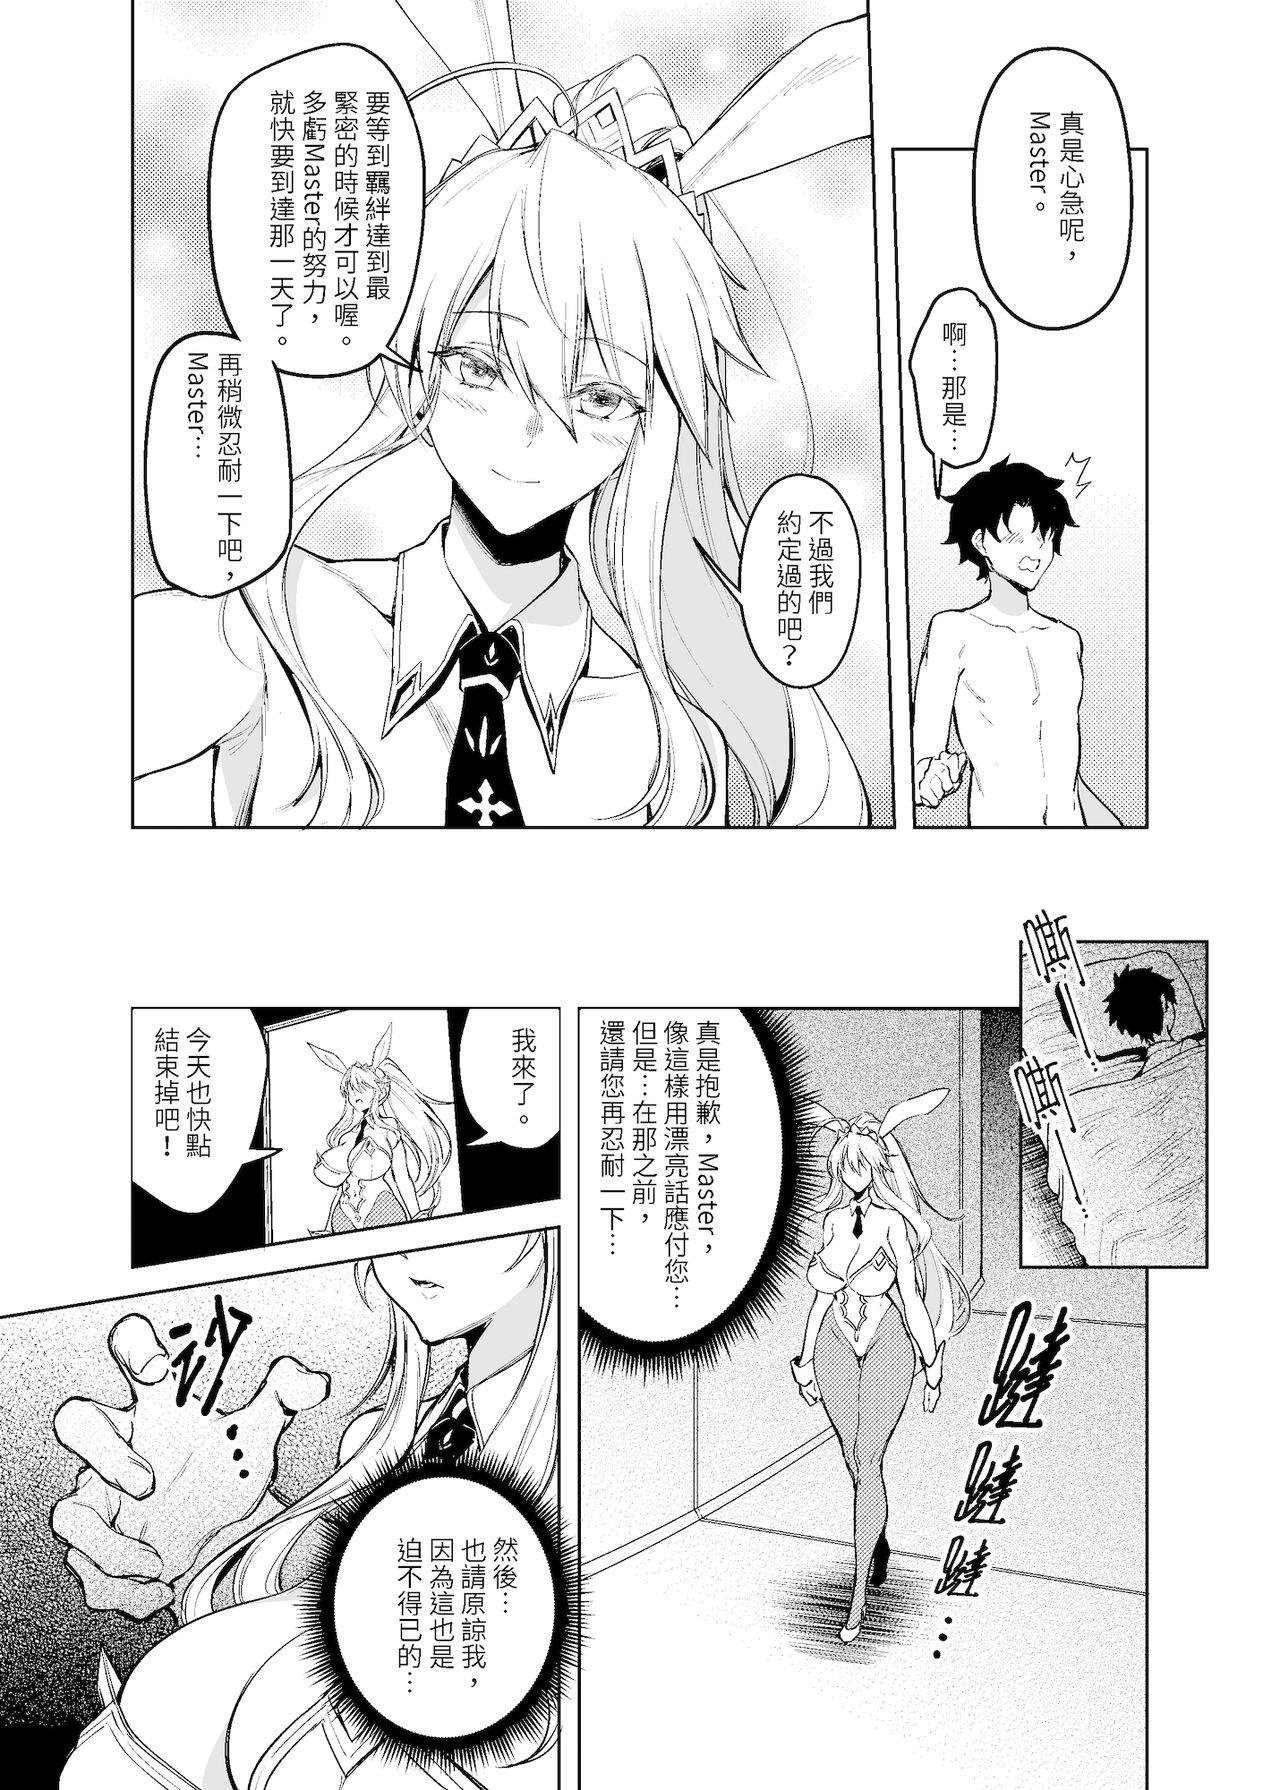 Deep Throat Engraving of lust with King Bunny, Part 1 - Fate grand order Foreplay - Page 4